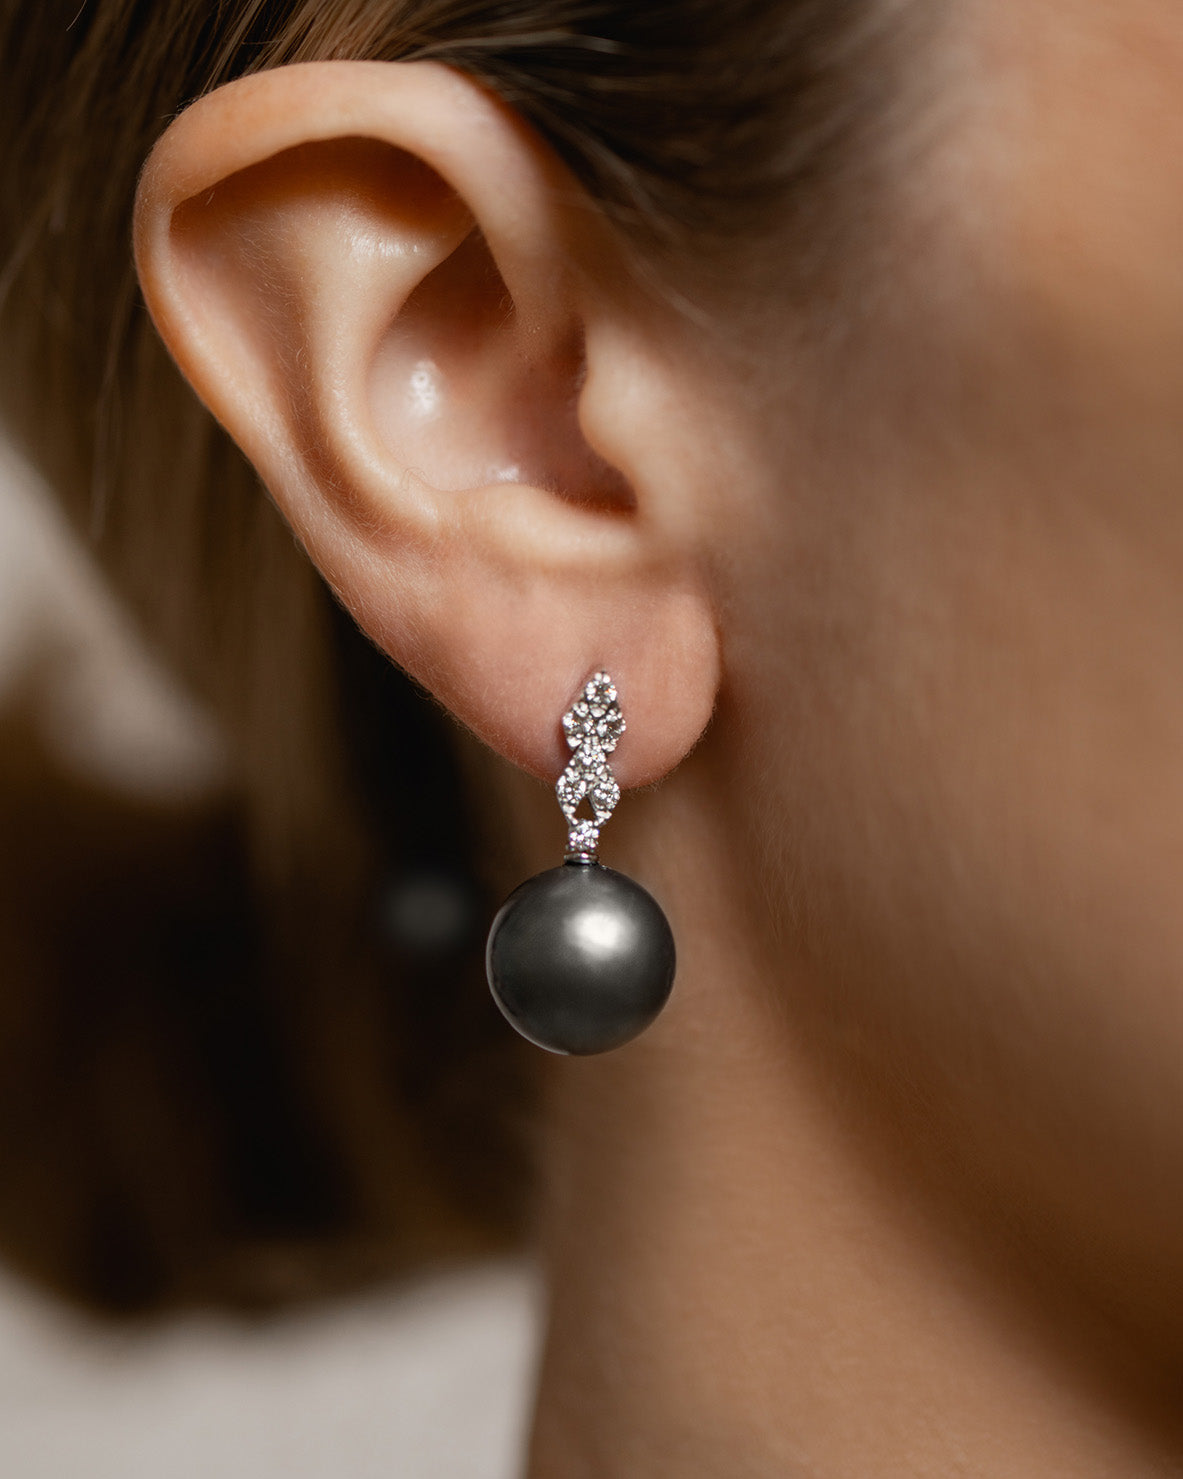 Paolo Piovan - Earrings Frosted Pearl